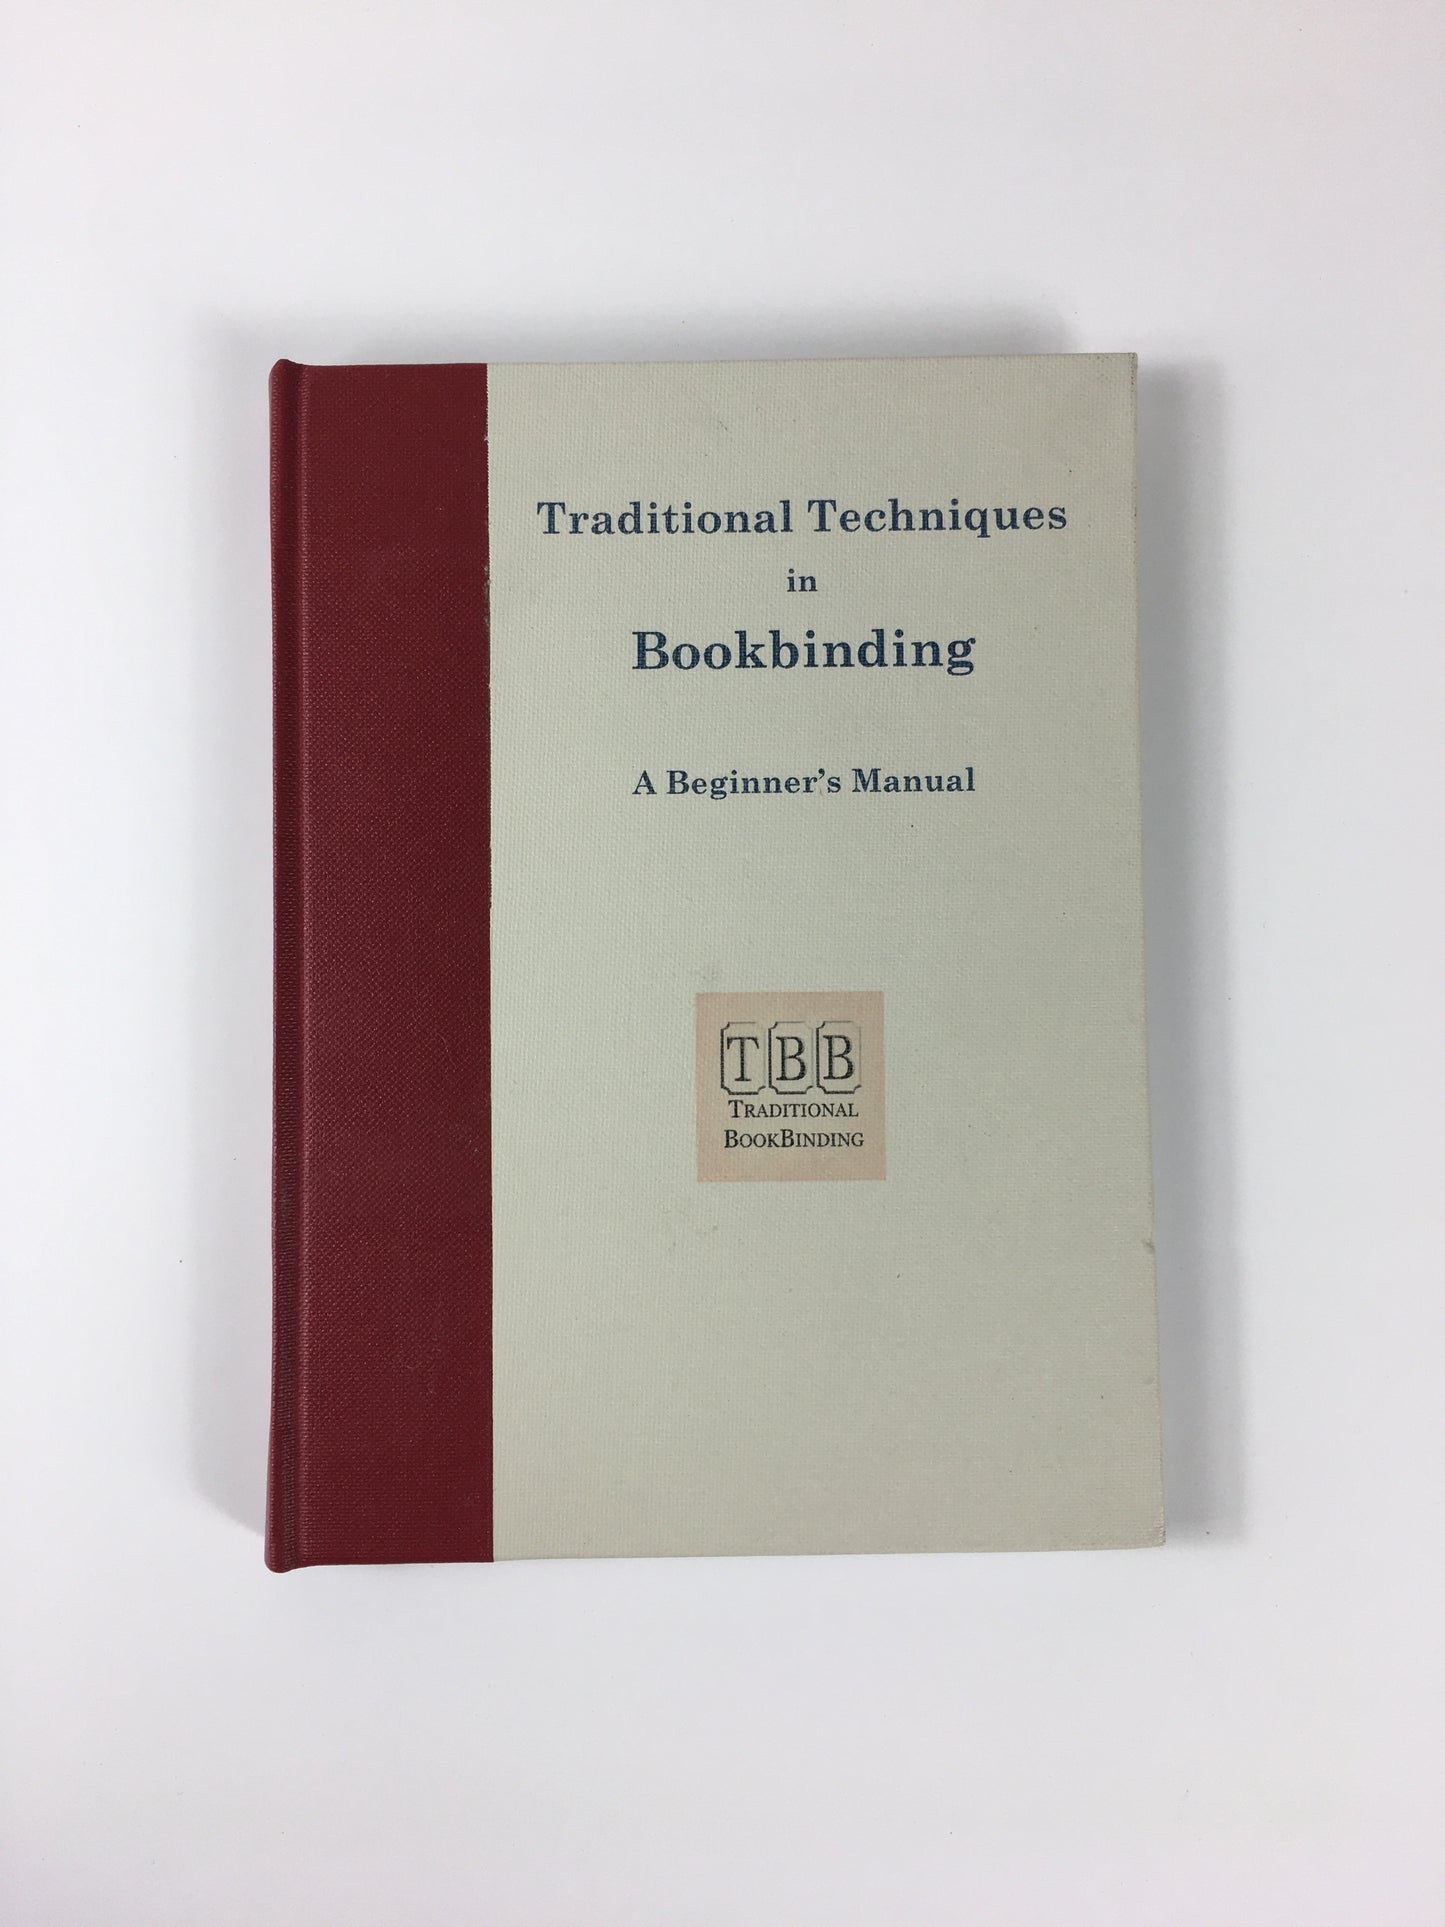 Traditional Techniques in Bookbinding- A Beginner's Manual